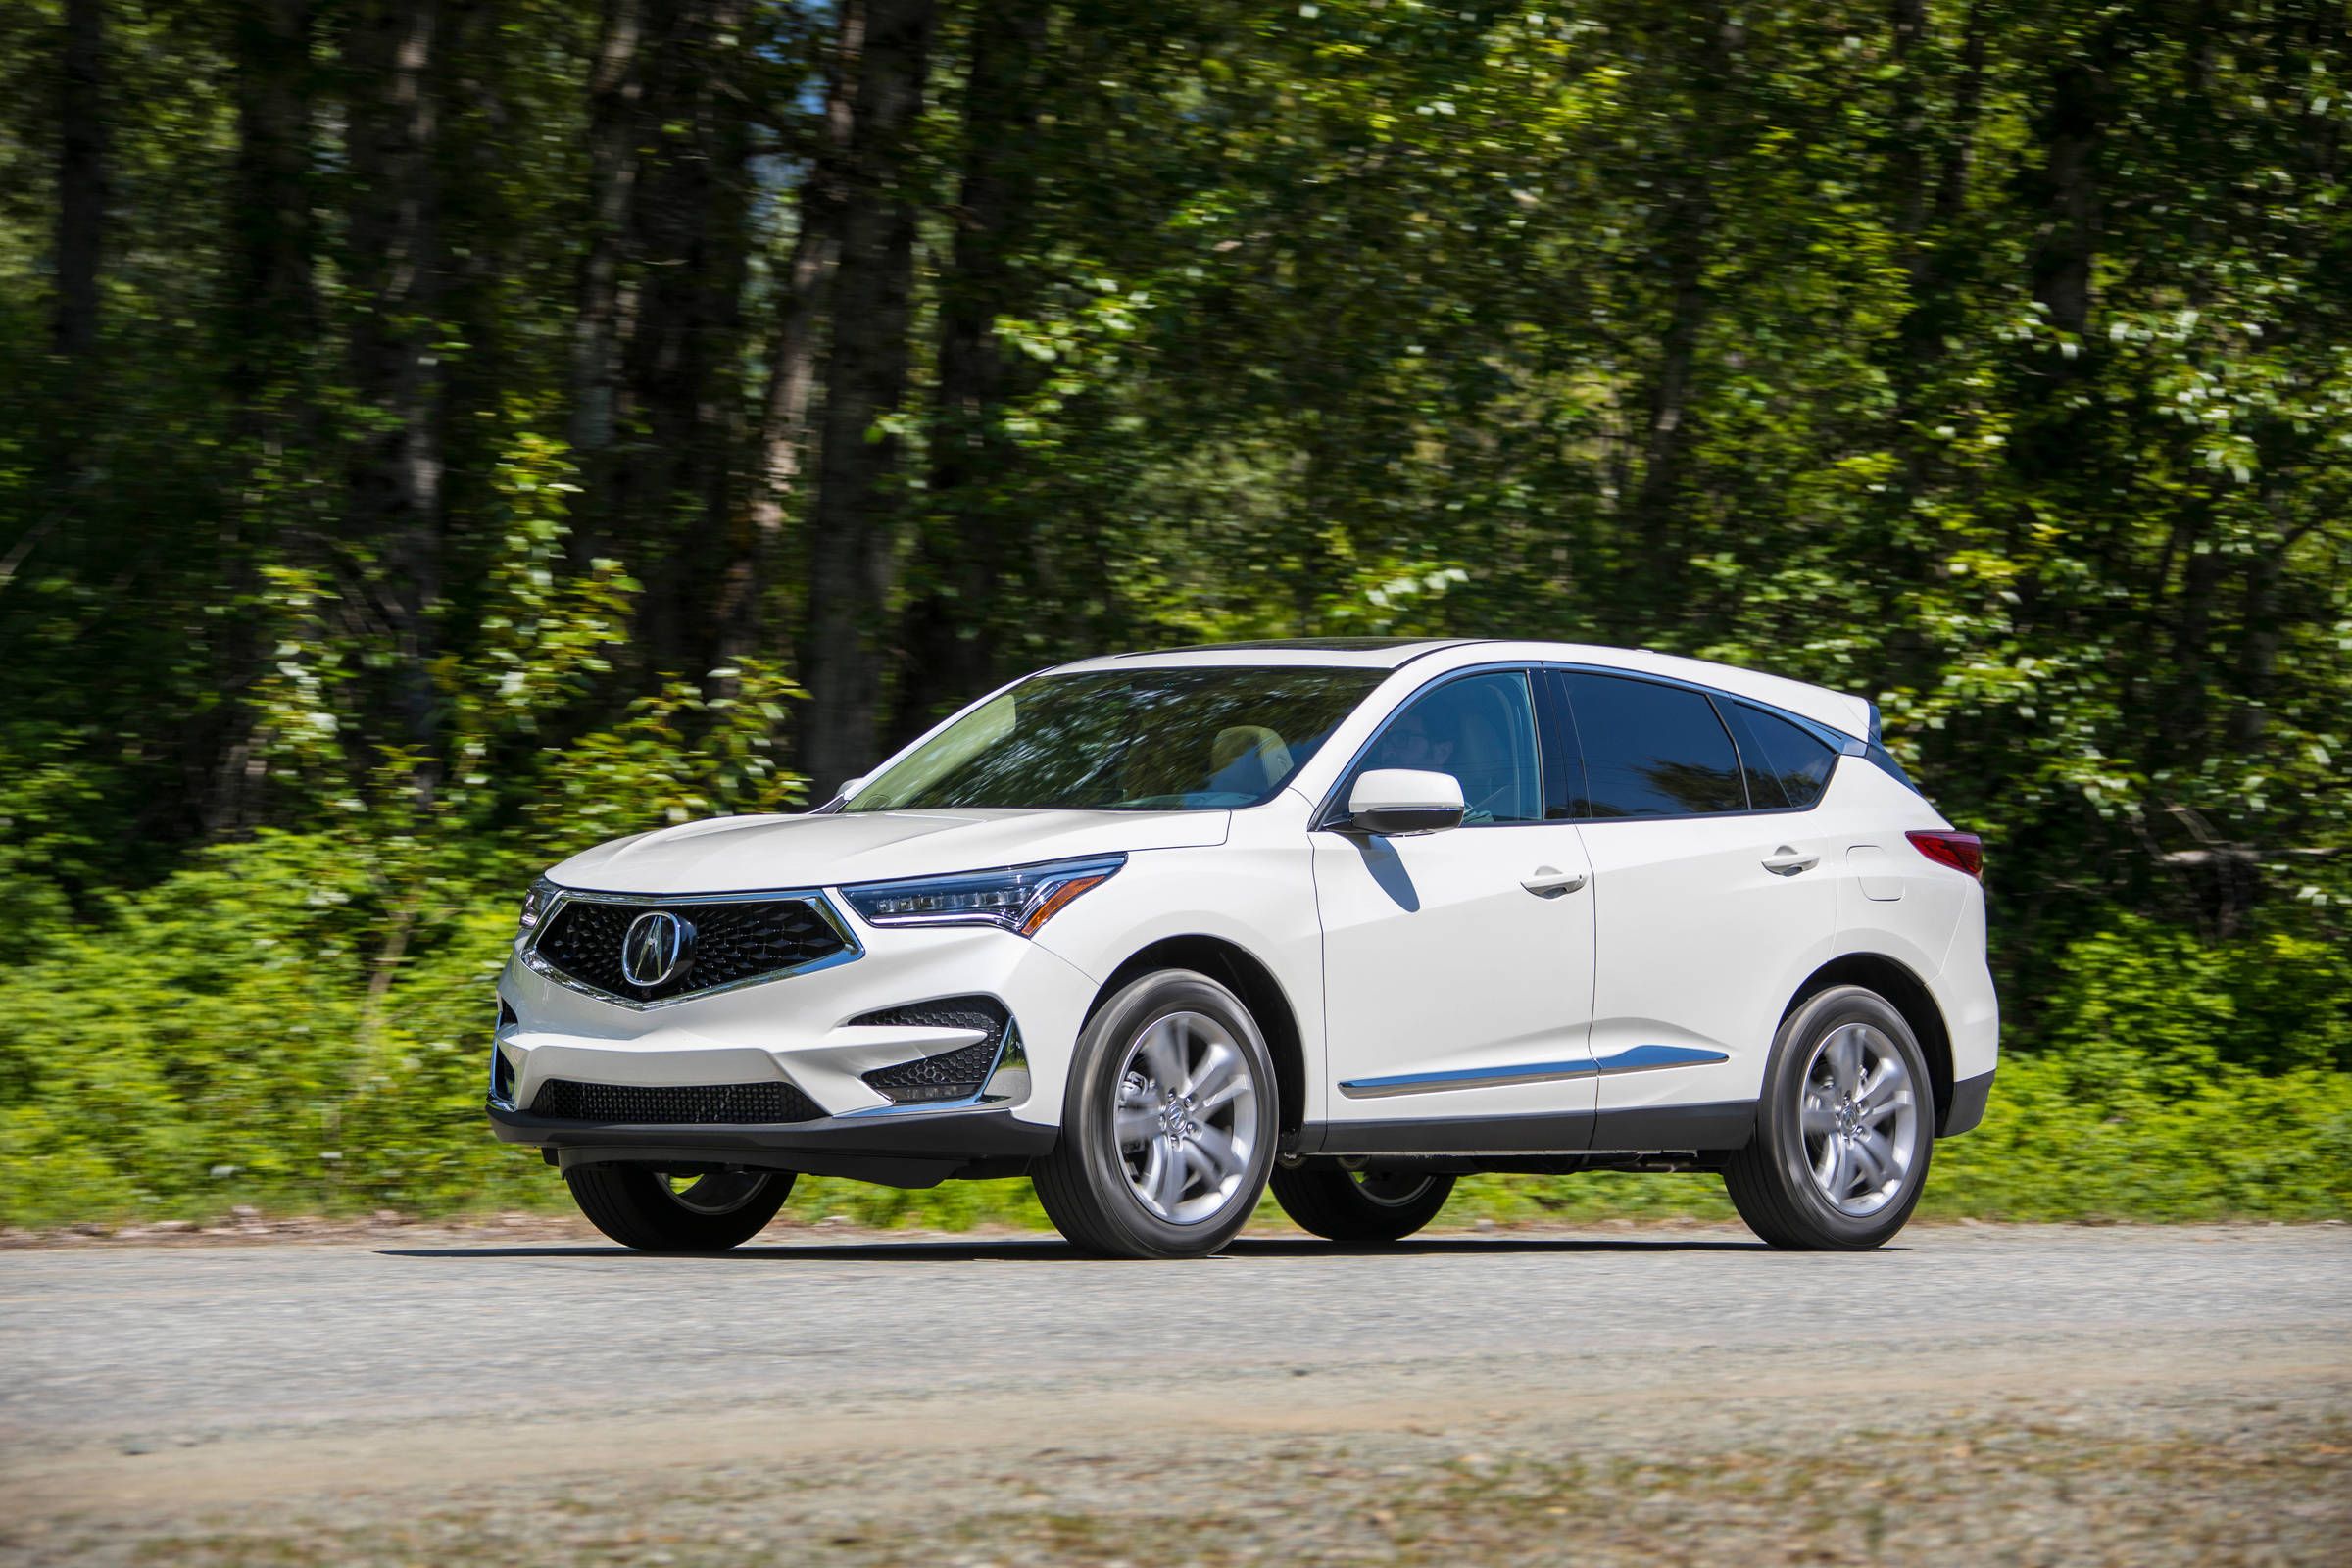 3 things we like about the 2019 Acura RDX (and 2 we don't)